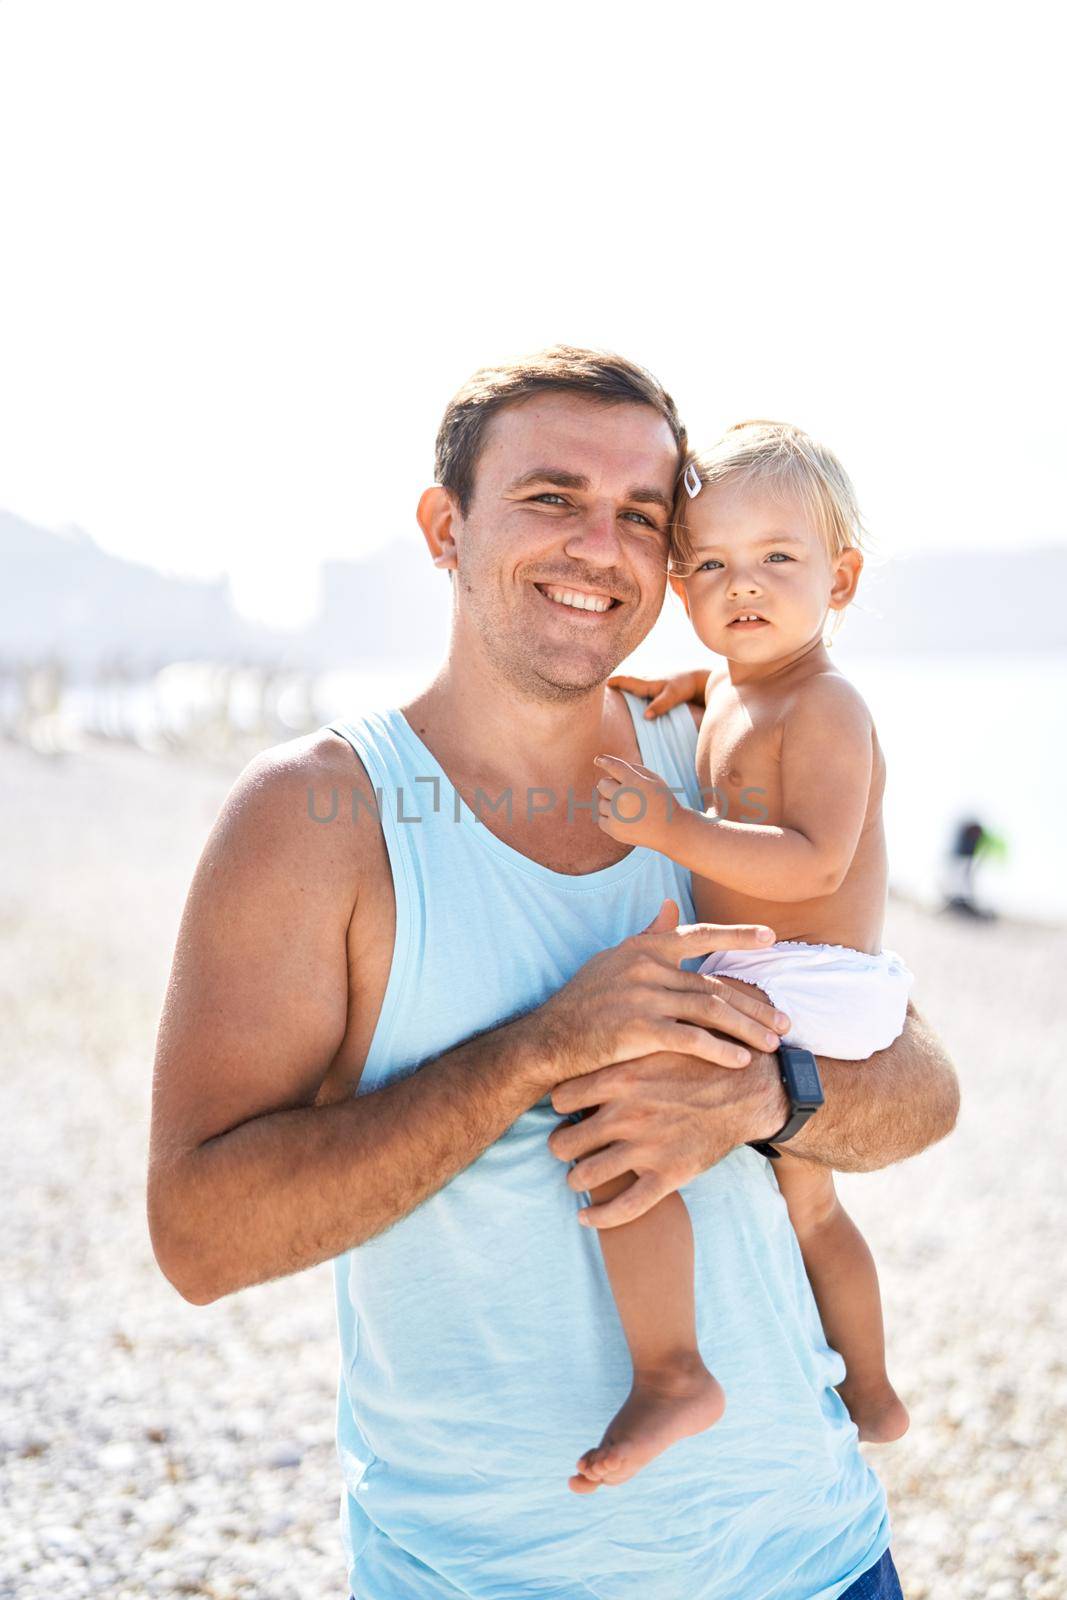 Smiling dad holding little daughter in his arms on the beach. Portrait. High quality photo